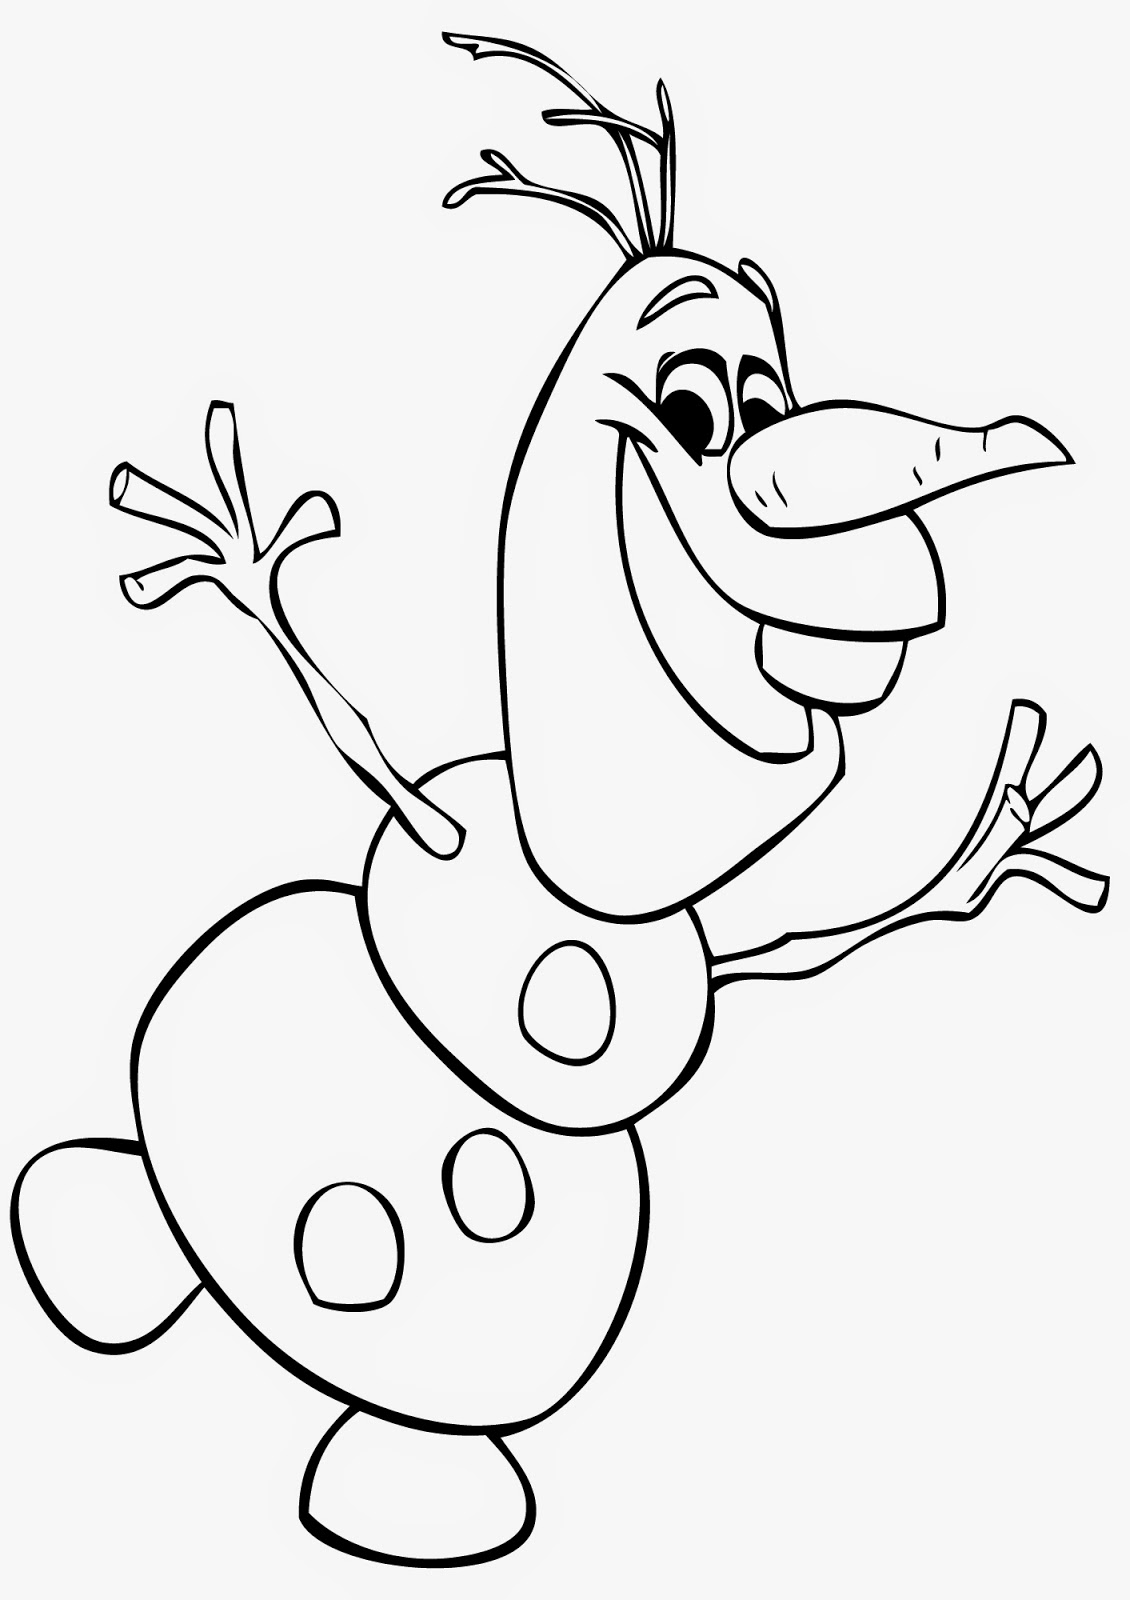 olafs face coloring pages - photo #33